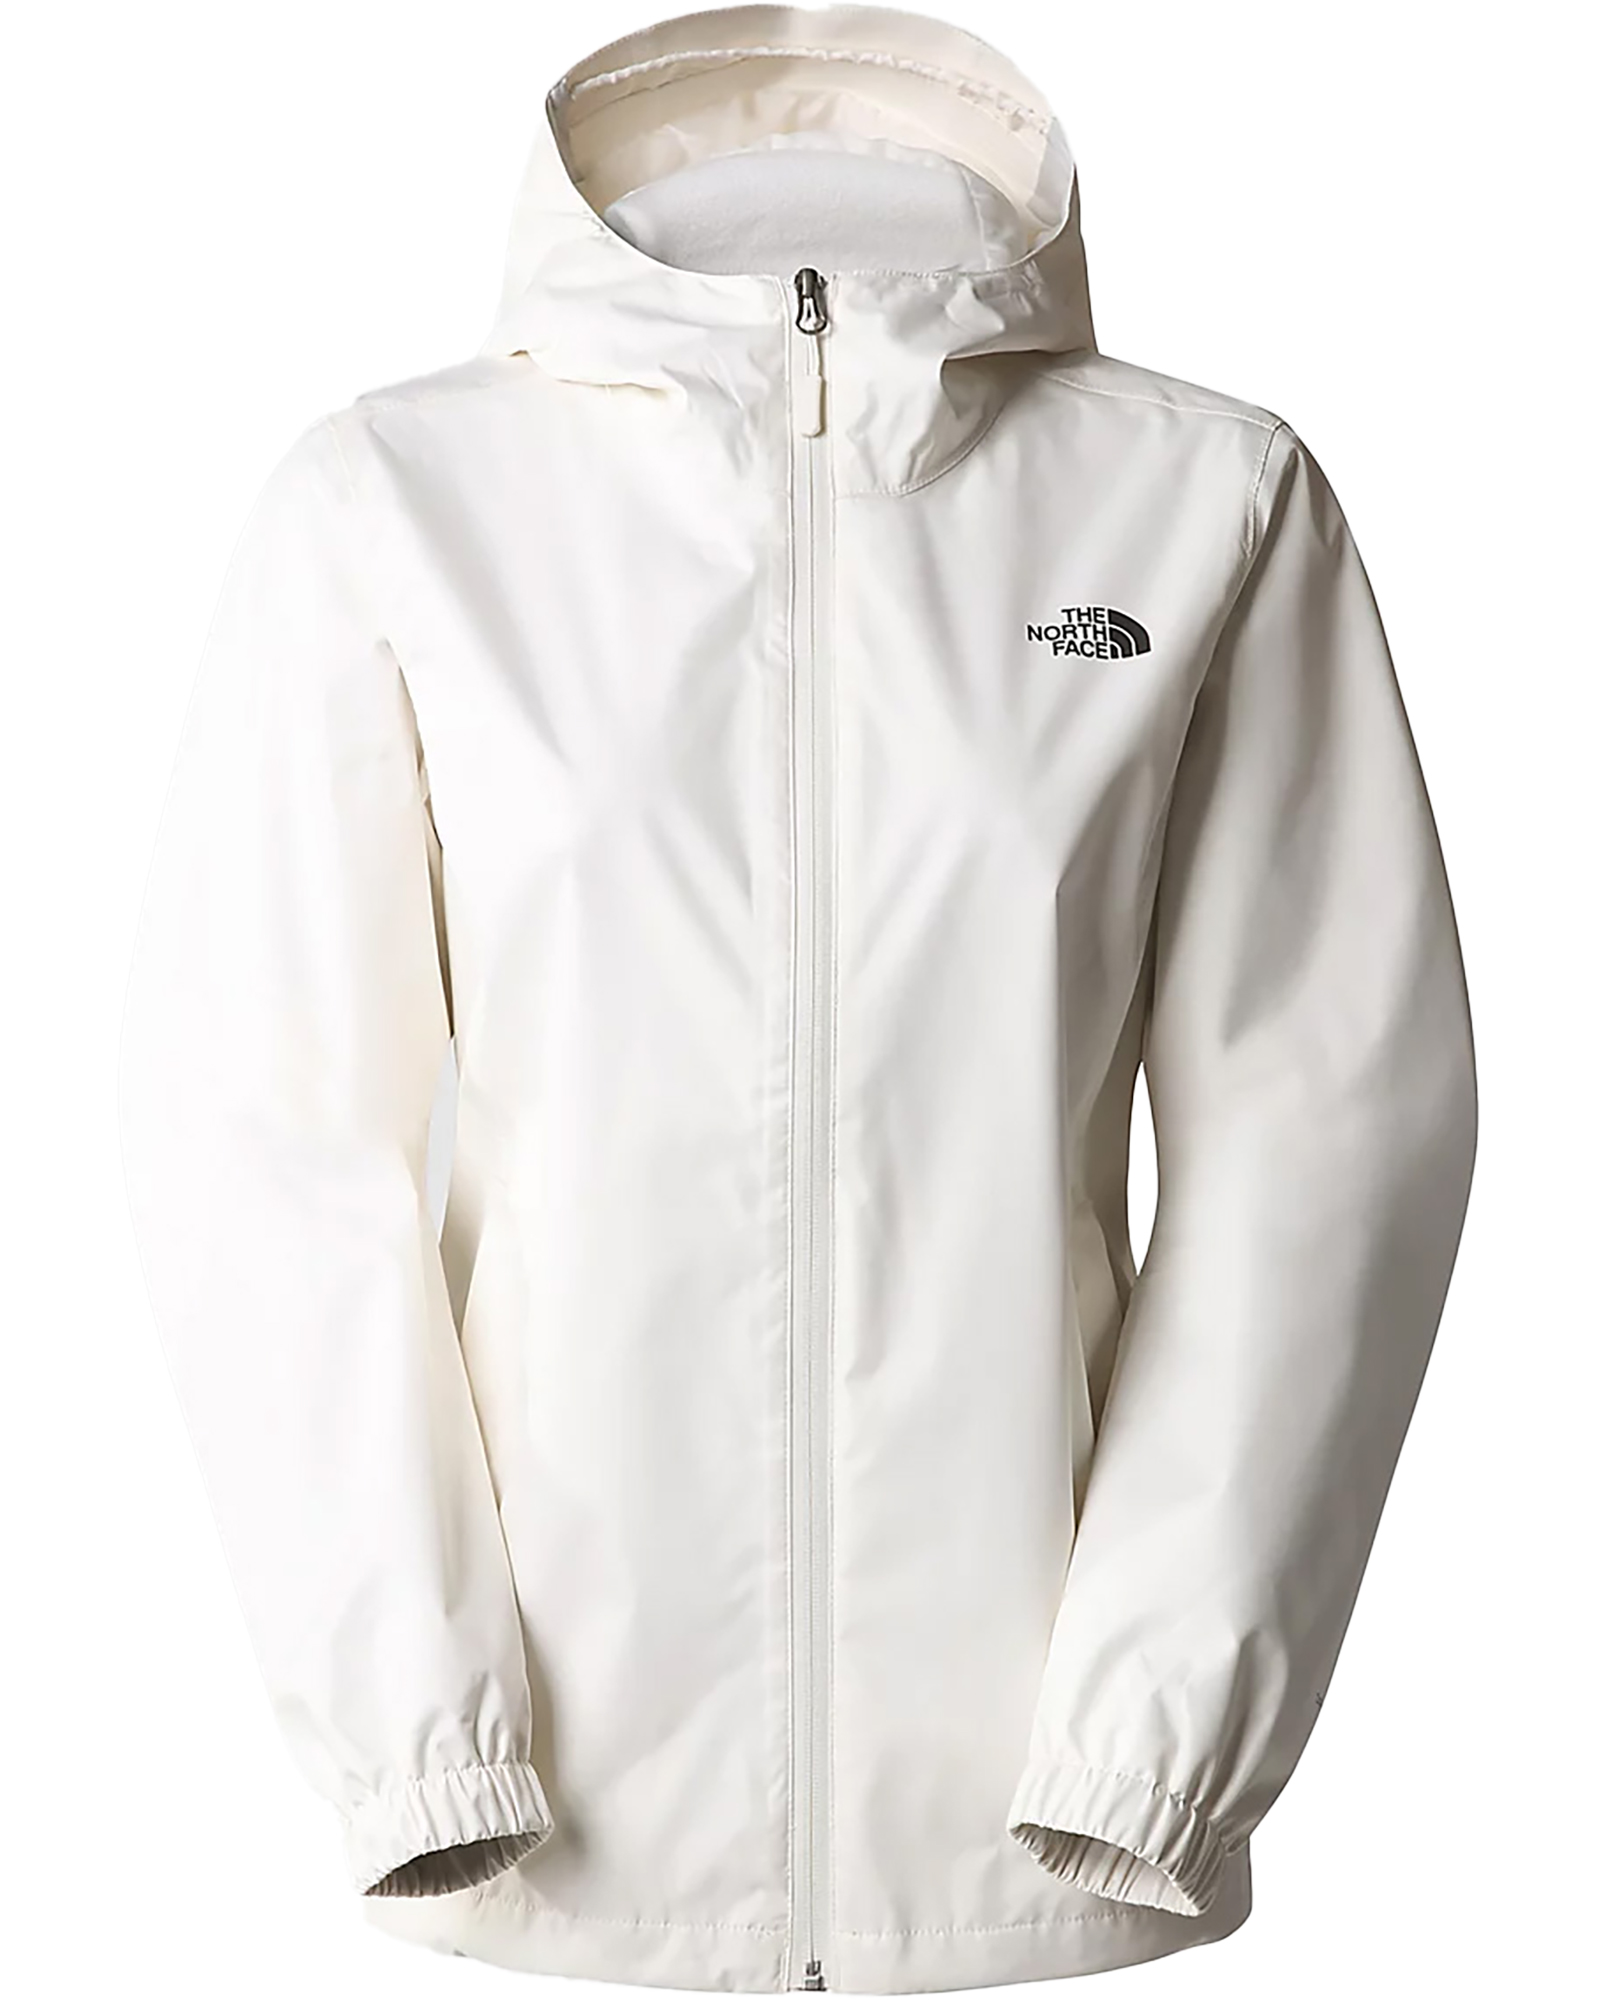 The North Face Quest DryVent Women’s Jacket - Gardenia White S